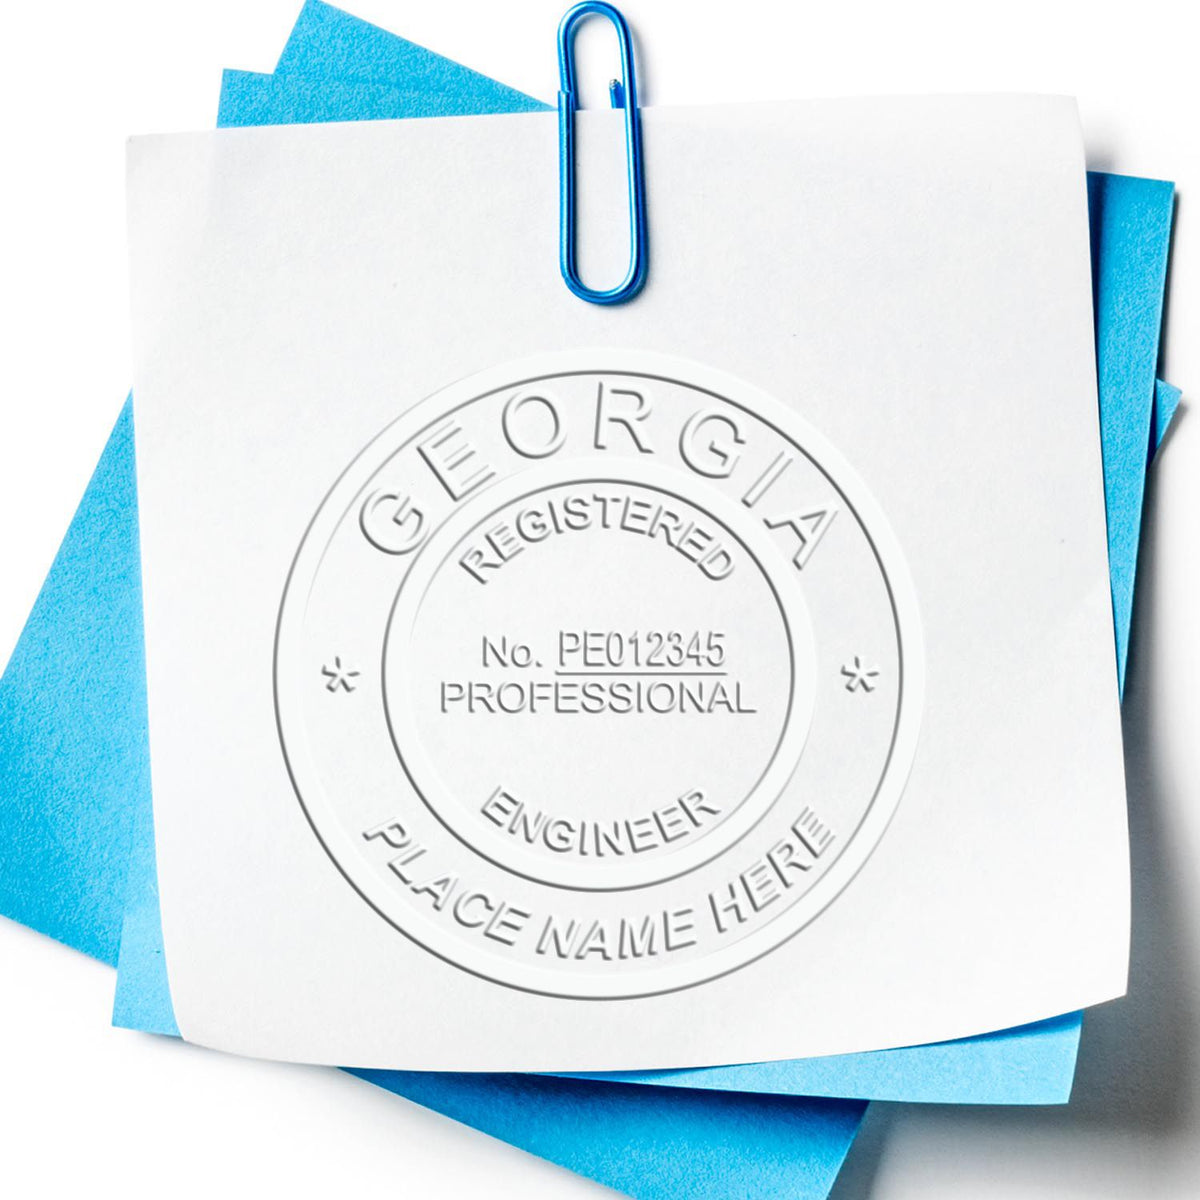 A photograph of the Georgia Engineer Desk Seal stamp impression reveals a vivid, professional image of the on paper.